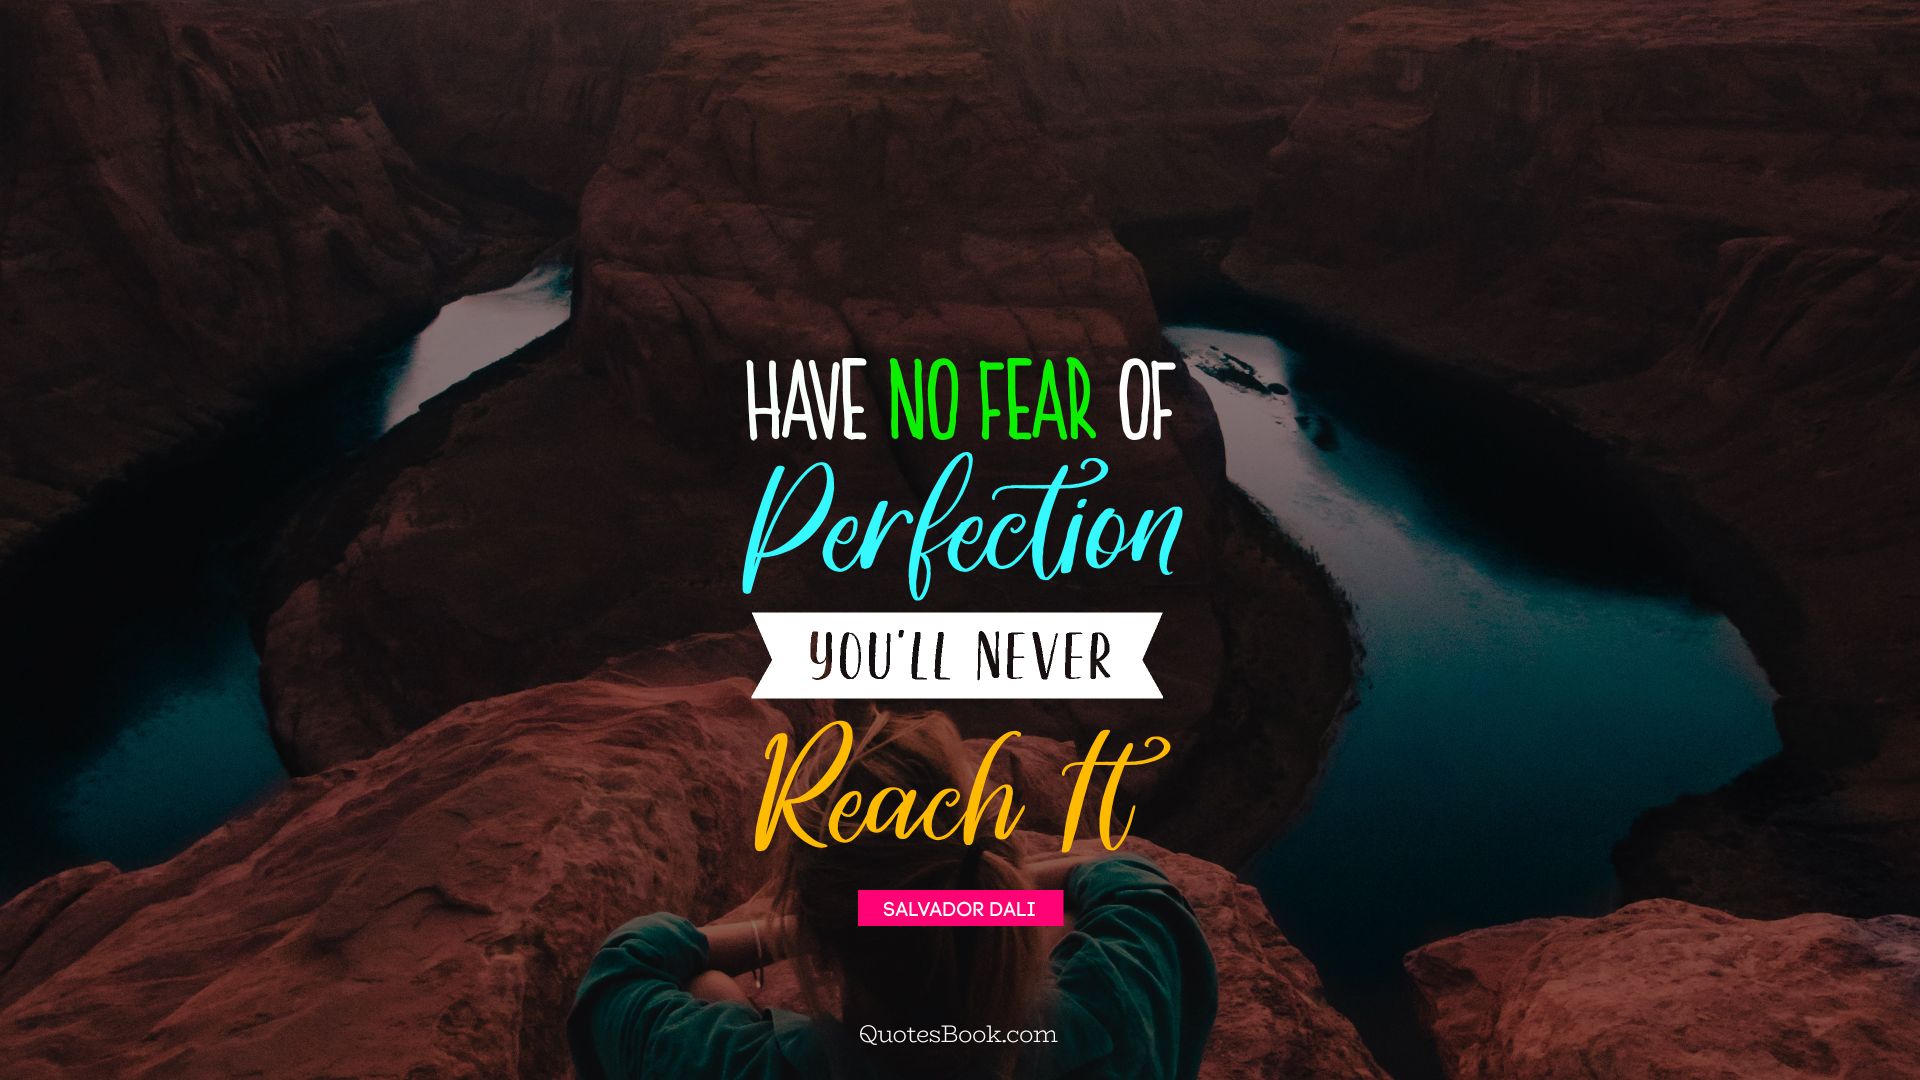 Have no fear of perfection you'll never reach it. - Quote by Salvador Dali